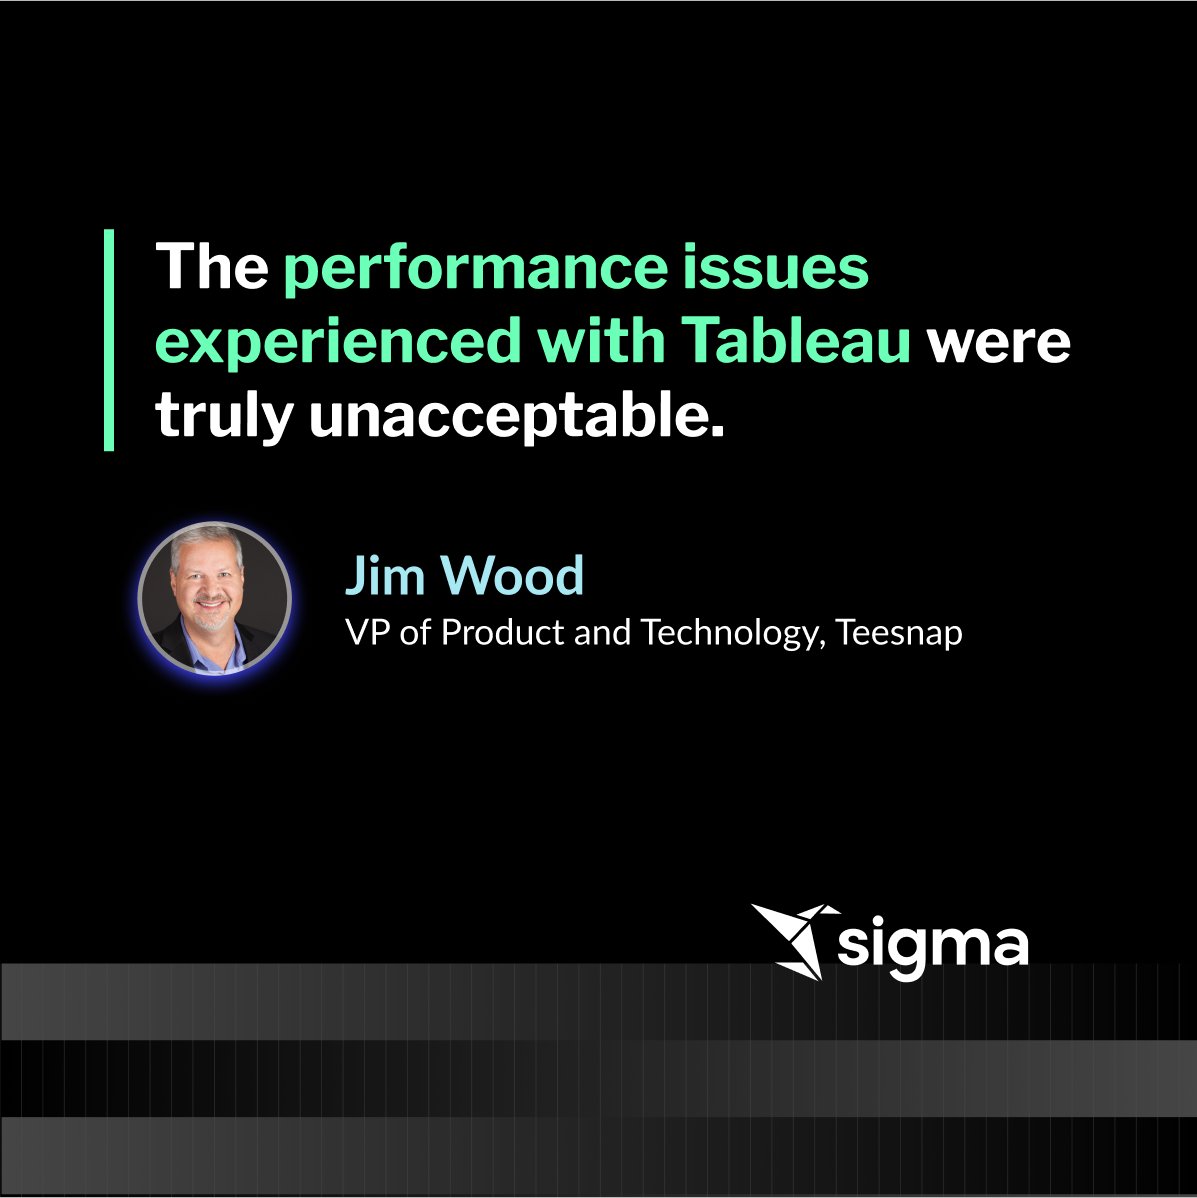 More people are leaving Tableau for good and switching to Sigma, the fast, cloud-based enterprise BI with a spreadsheet UI. Read why Teesnap migrated over to Sigma and why they say putter late than never. sigmacomputing.com/blog/why-teesn…